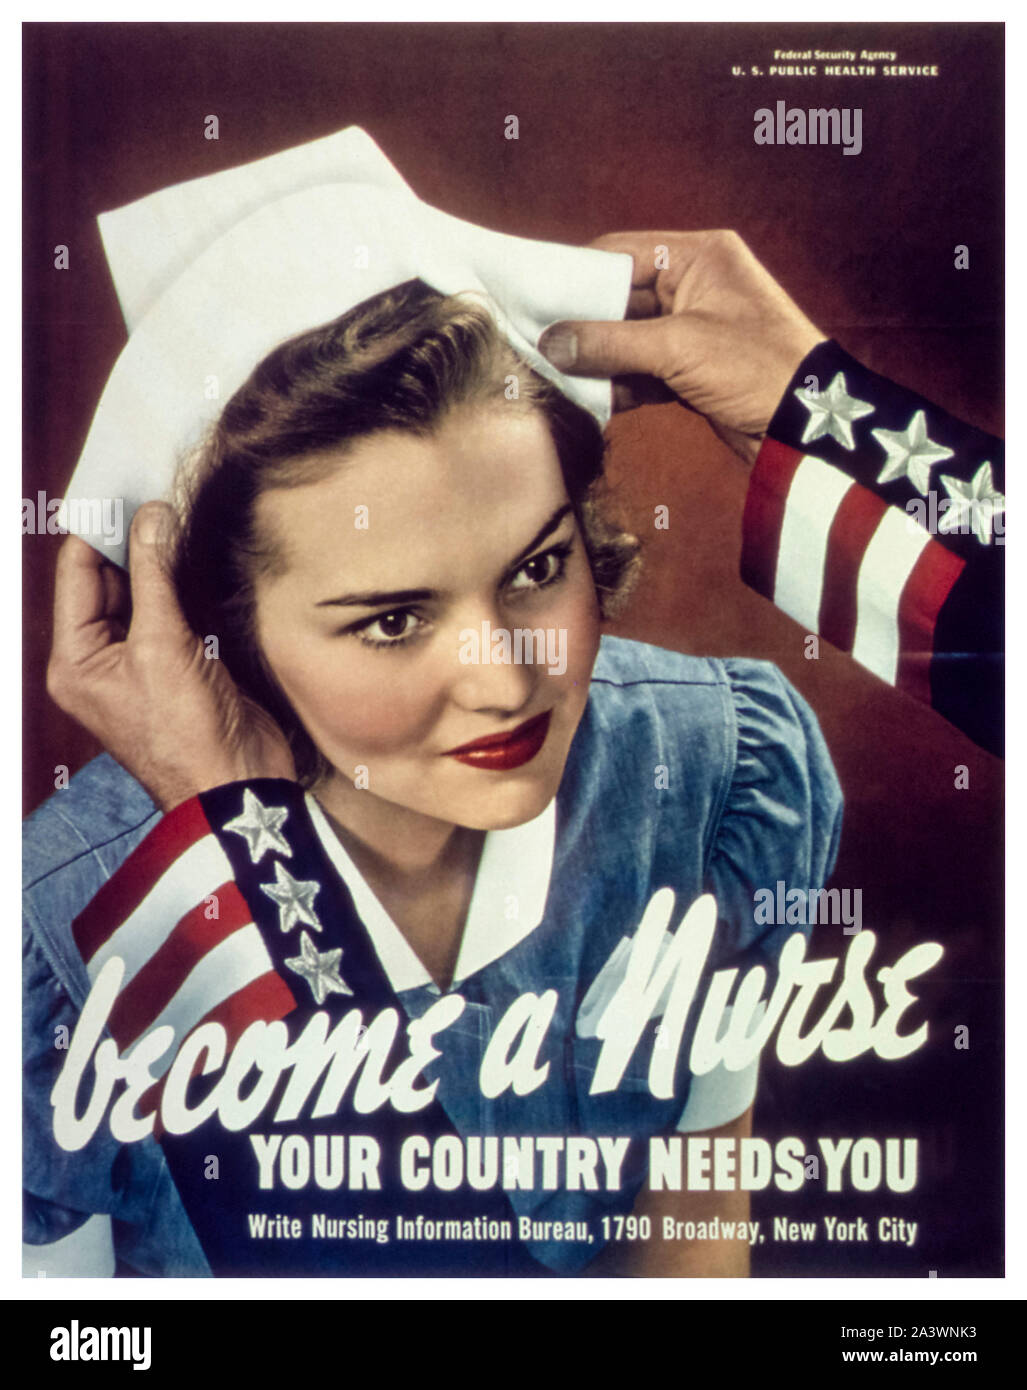 American, US, WW2, Female recruitment poster, Become a Nurse, Your country Needs you, (woman in nurses uniform), 1941-1945 Stock Photo